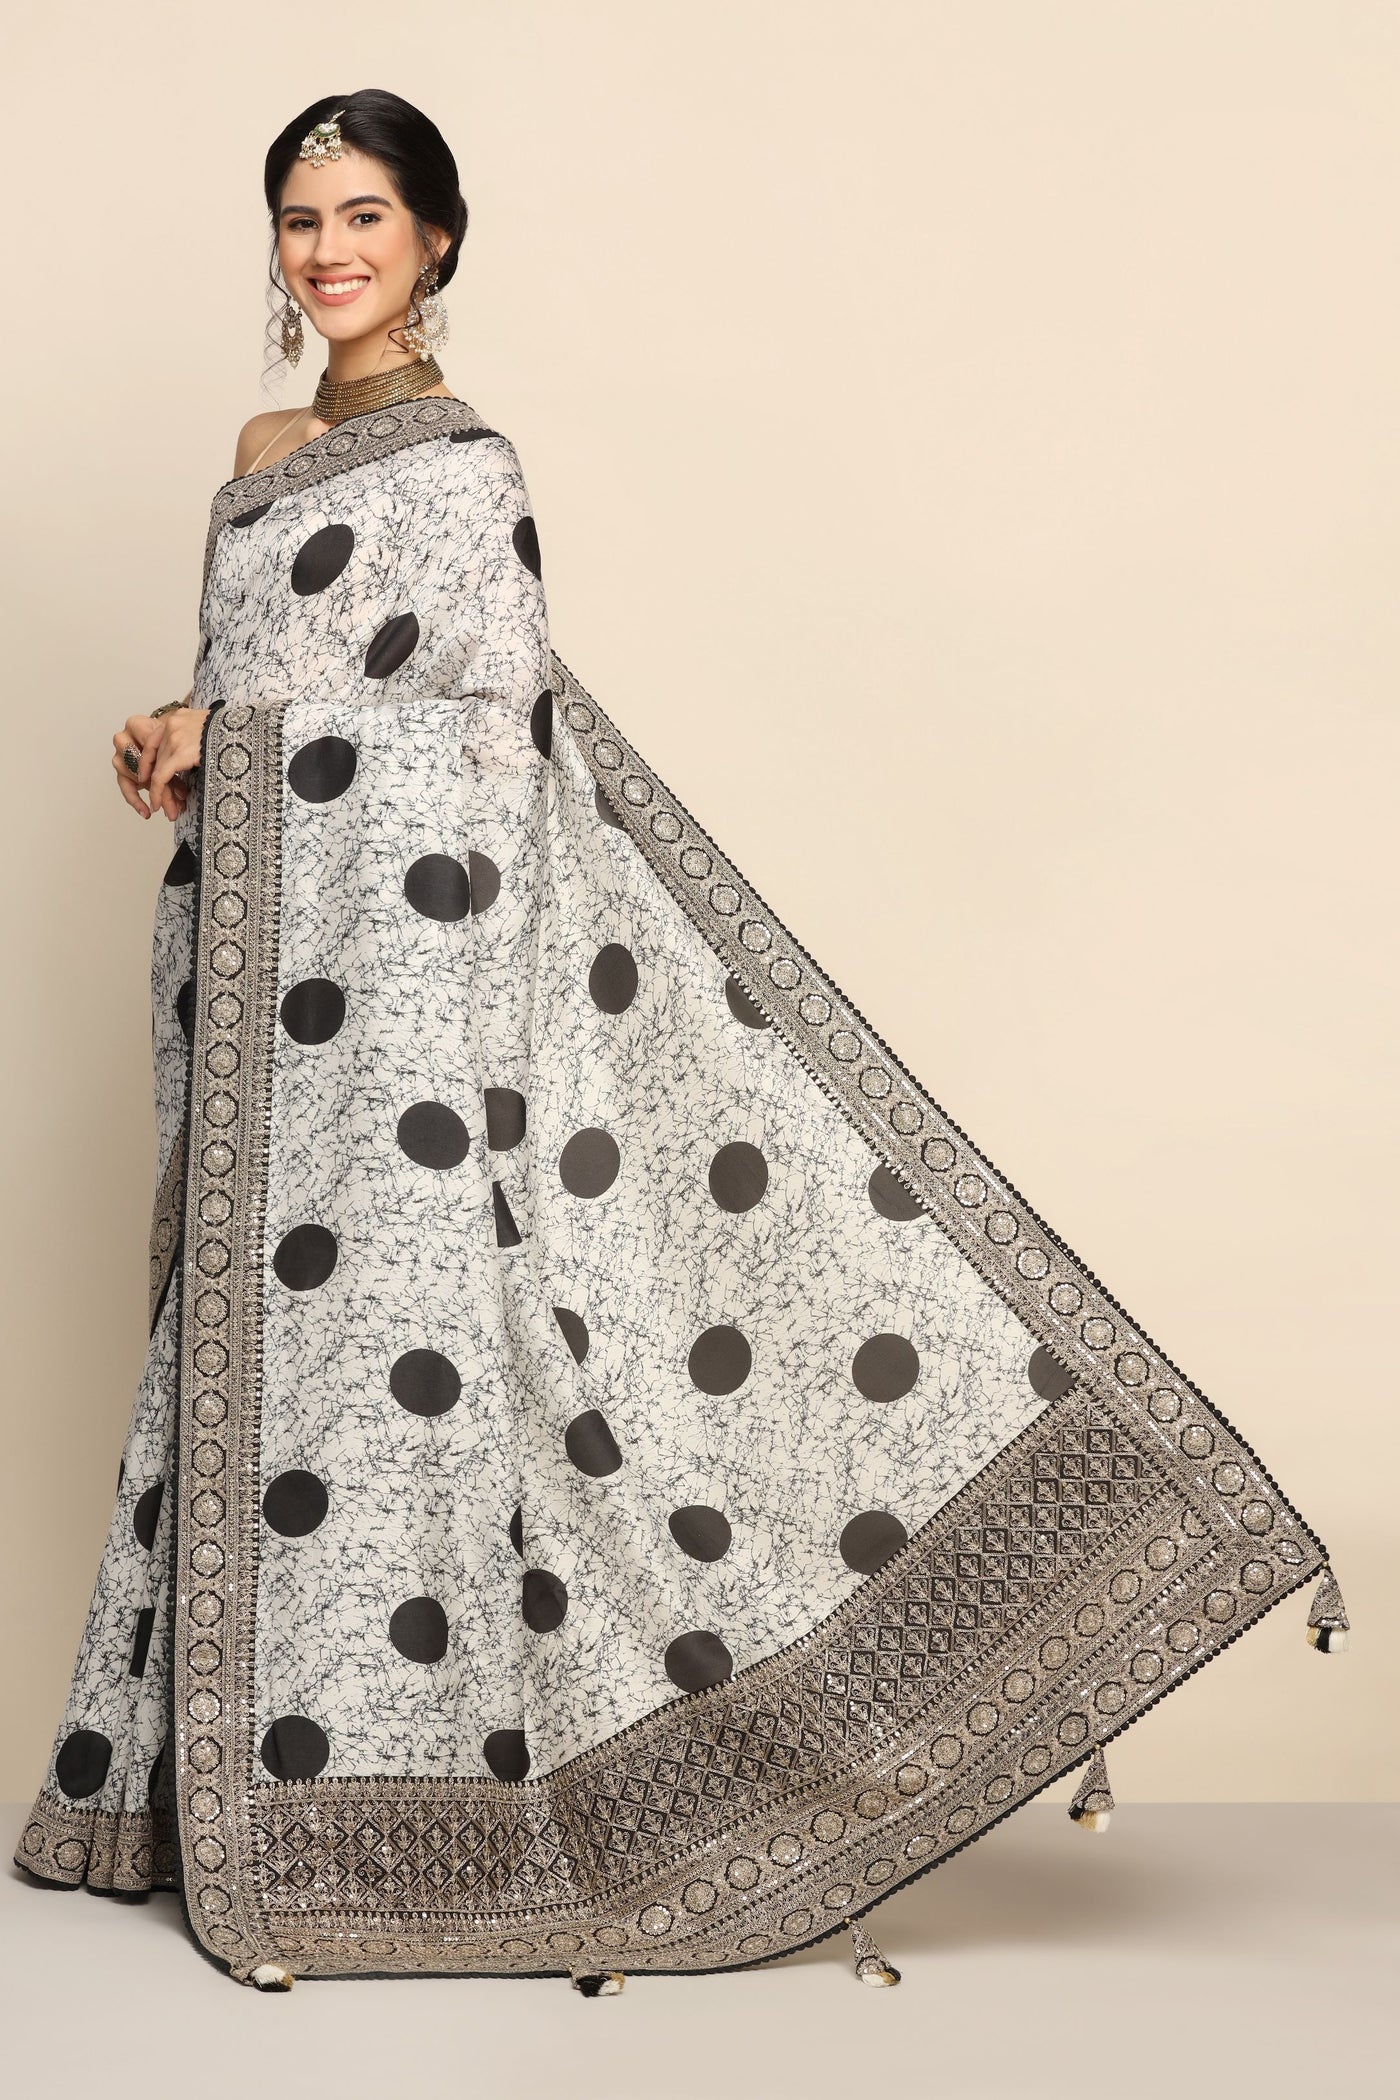 Elegance Redefined: Black and White Saree with Geometrical Print and Sparkling Embellishments